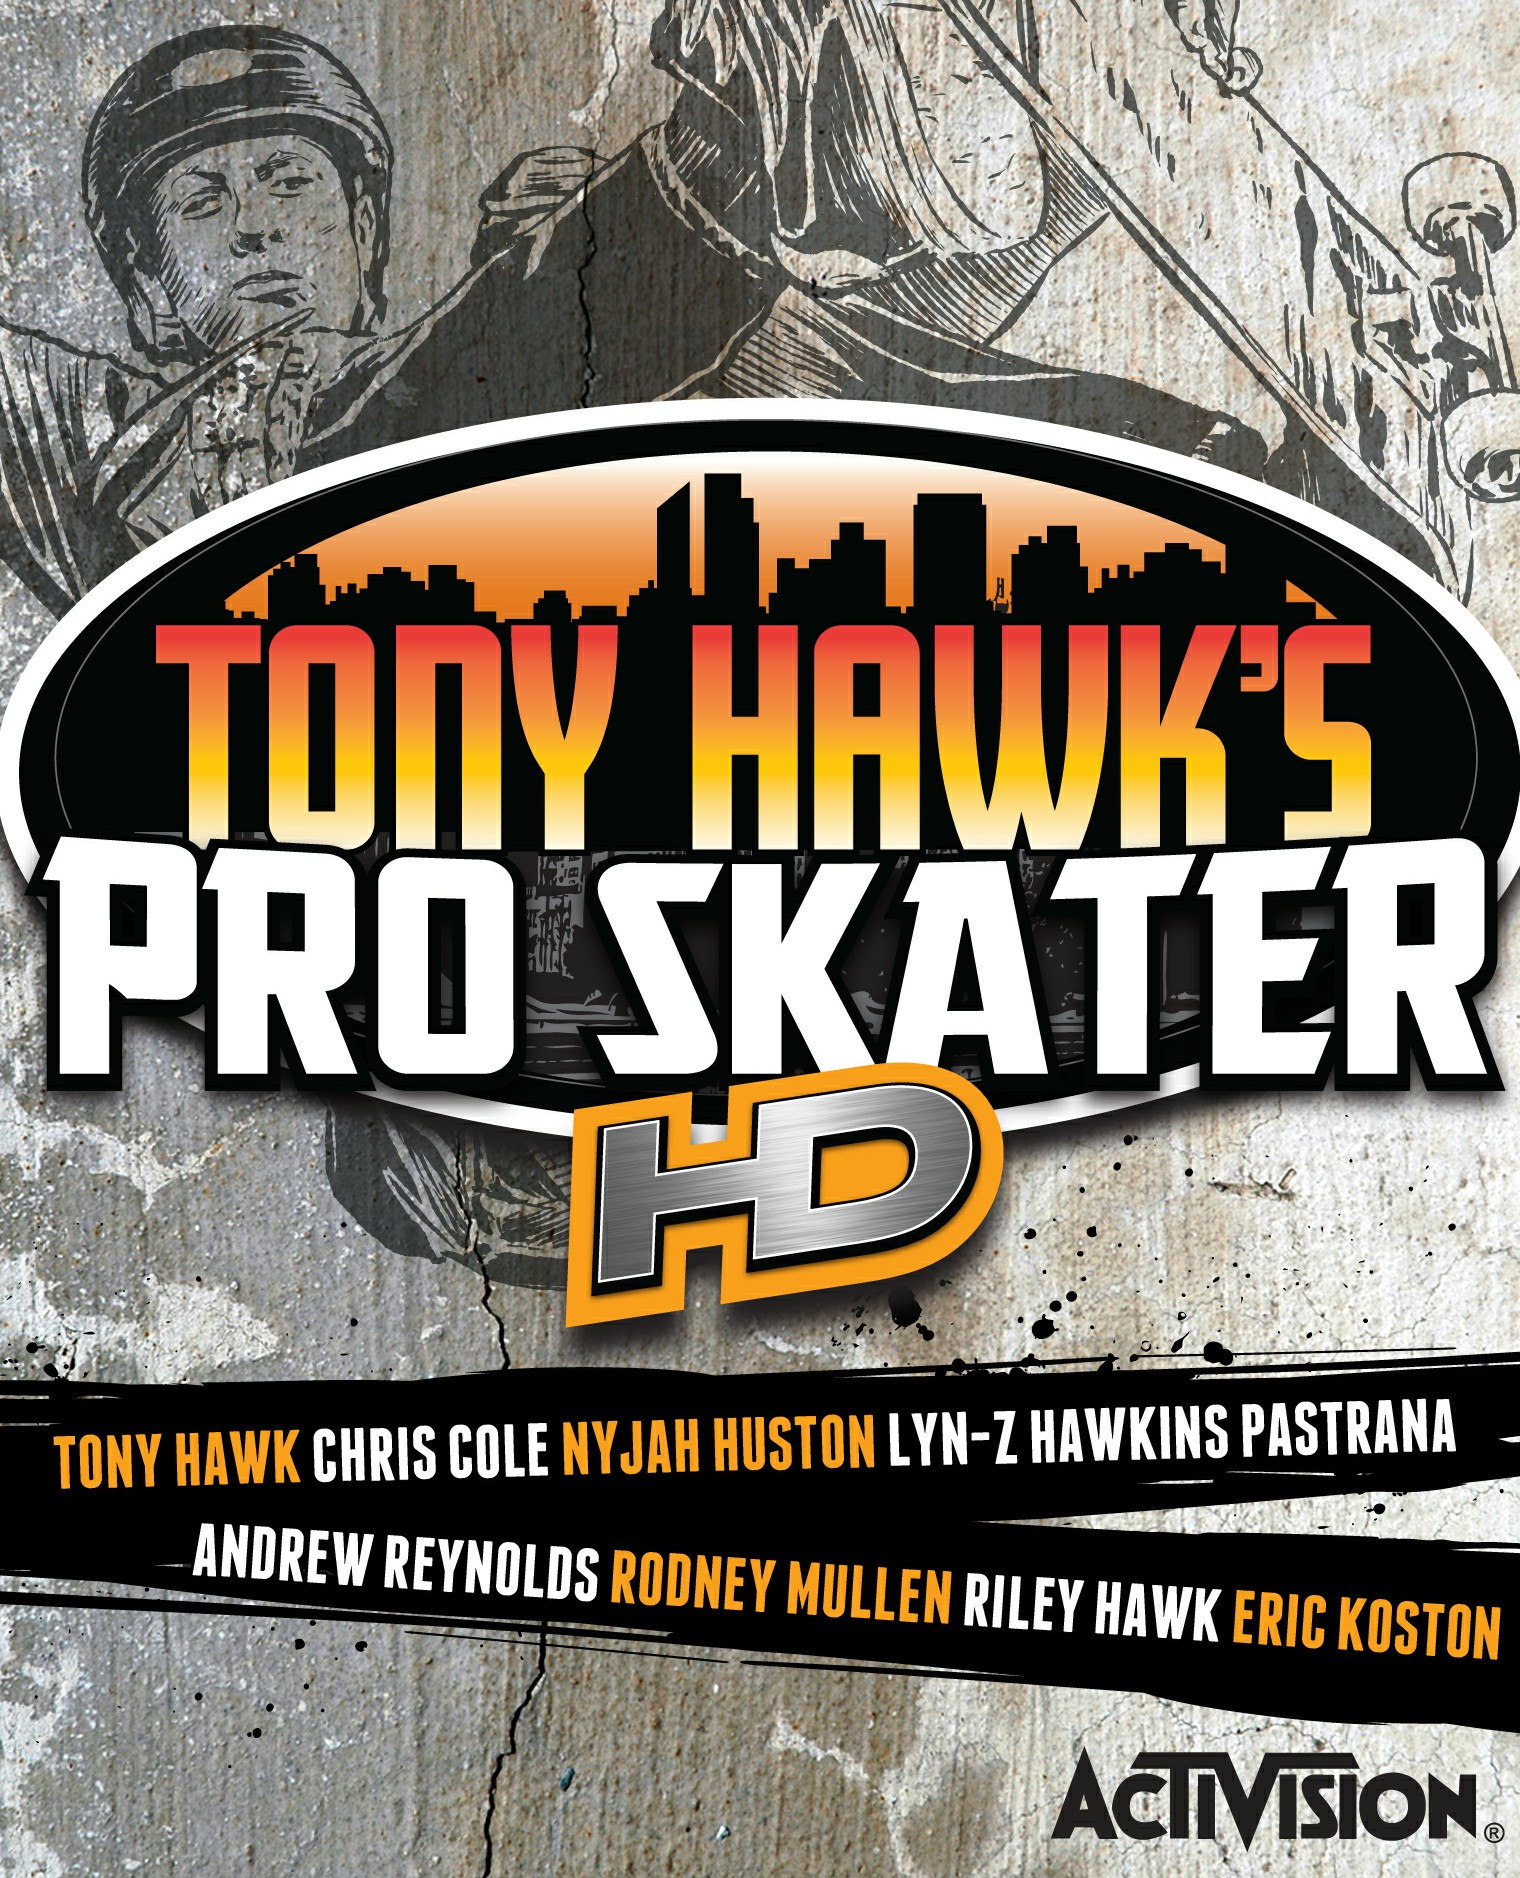 https://static.wikia.nocookie.net/tonyhawkgames/images/3/36/Tony_Hawk%27s_Pro_Skater_HD_Cover.png/revision/latest?cb=20170720001212